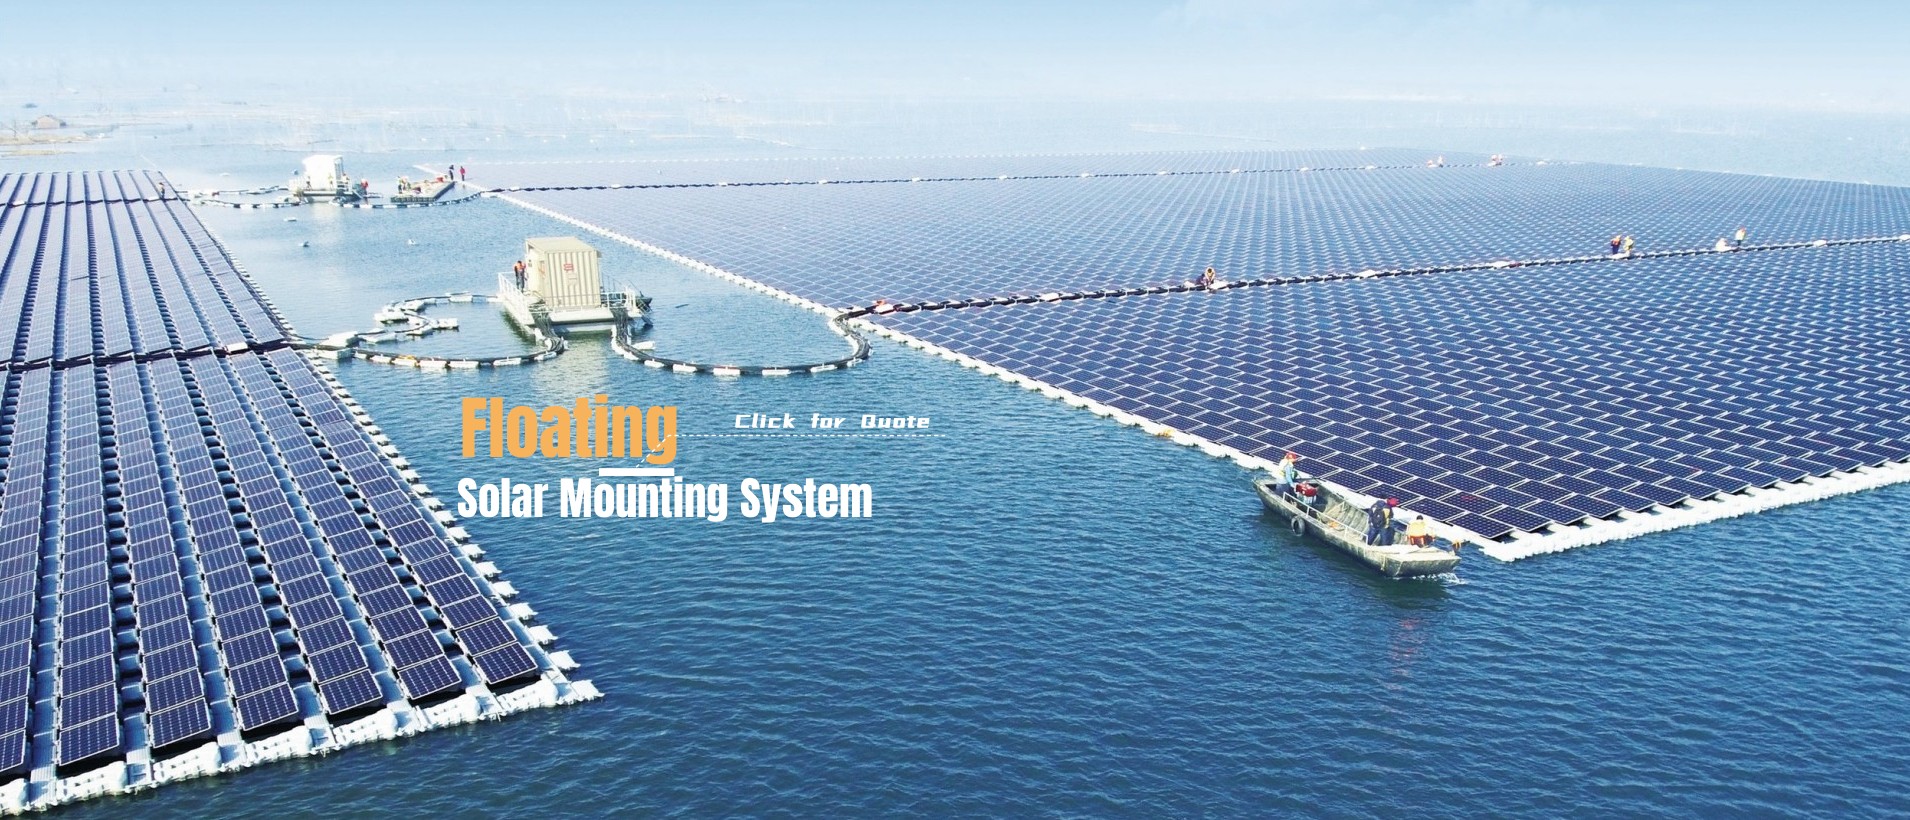 Floating PV Mounting System Solution